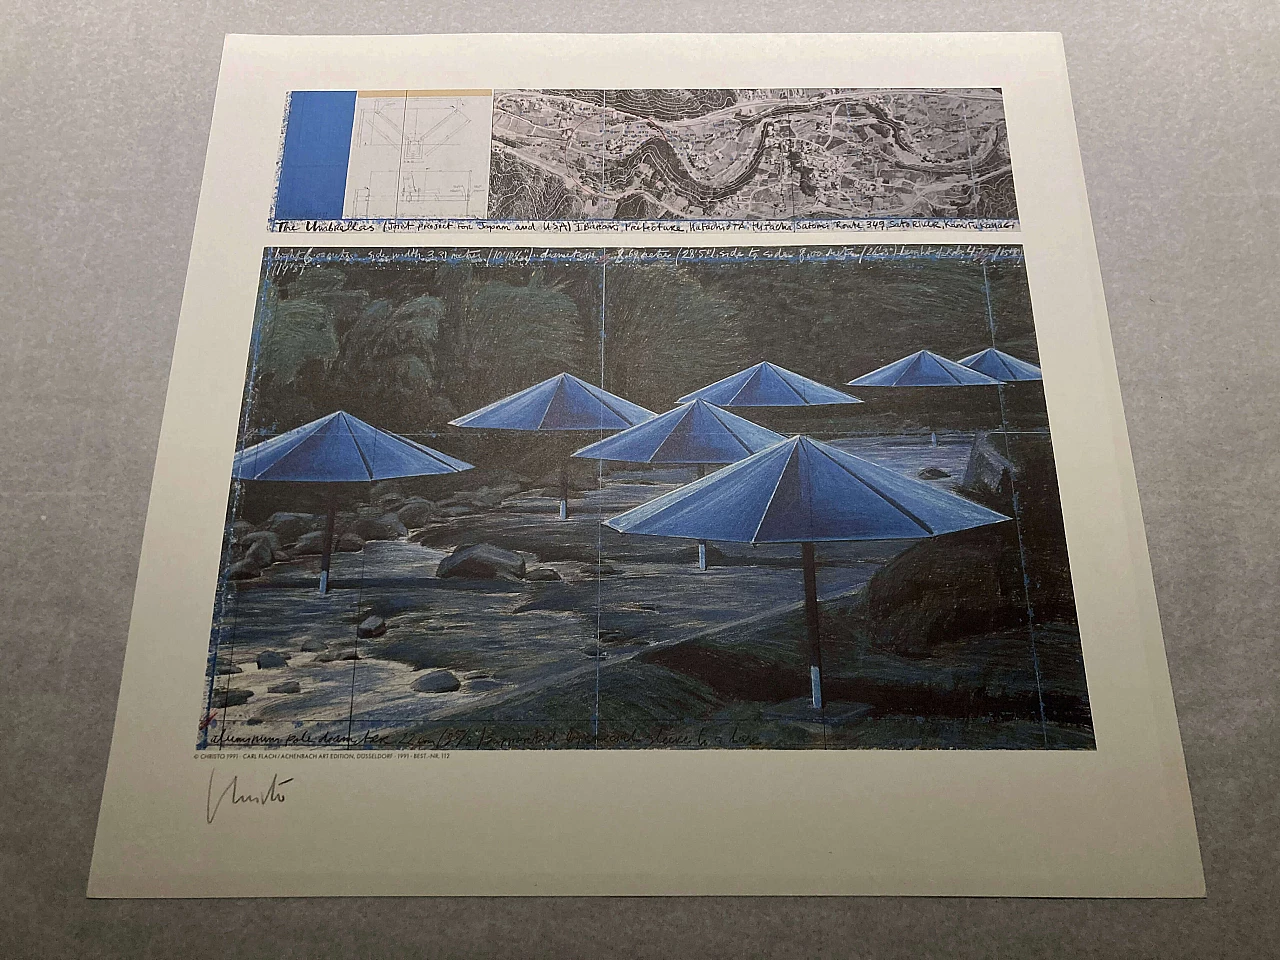 Christo, The Umbrellas - Joint Project for Japan and USA, lithograph, 1991 5